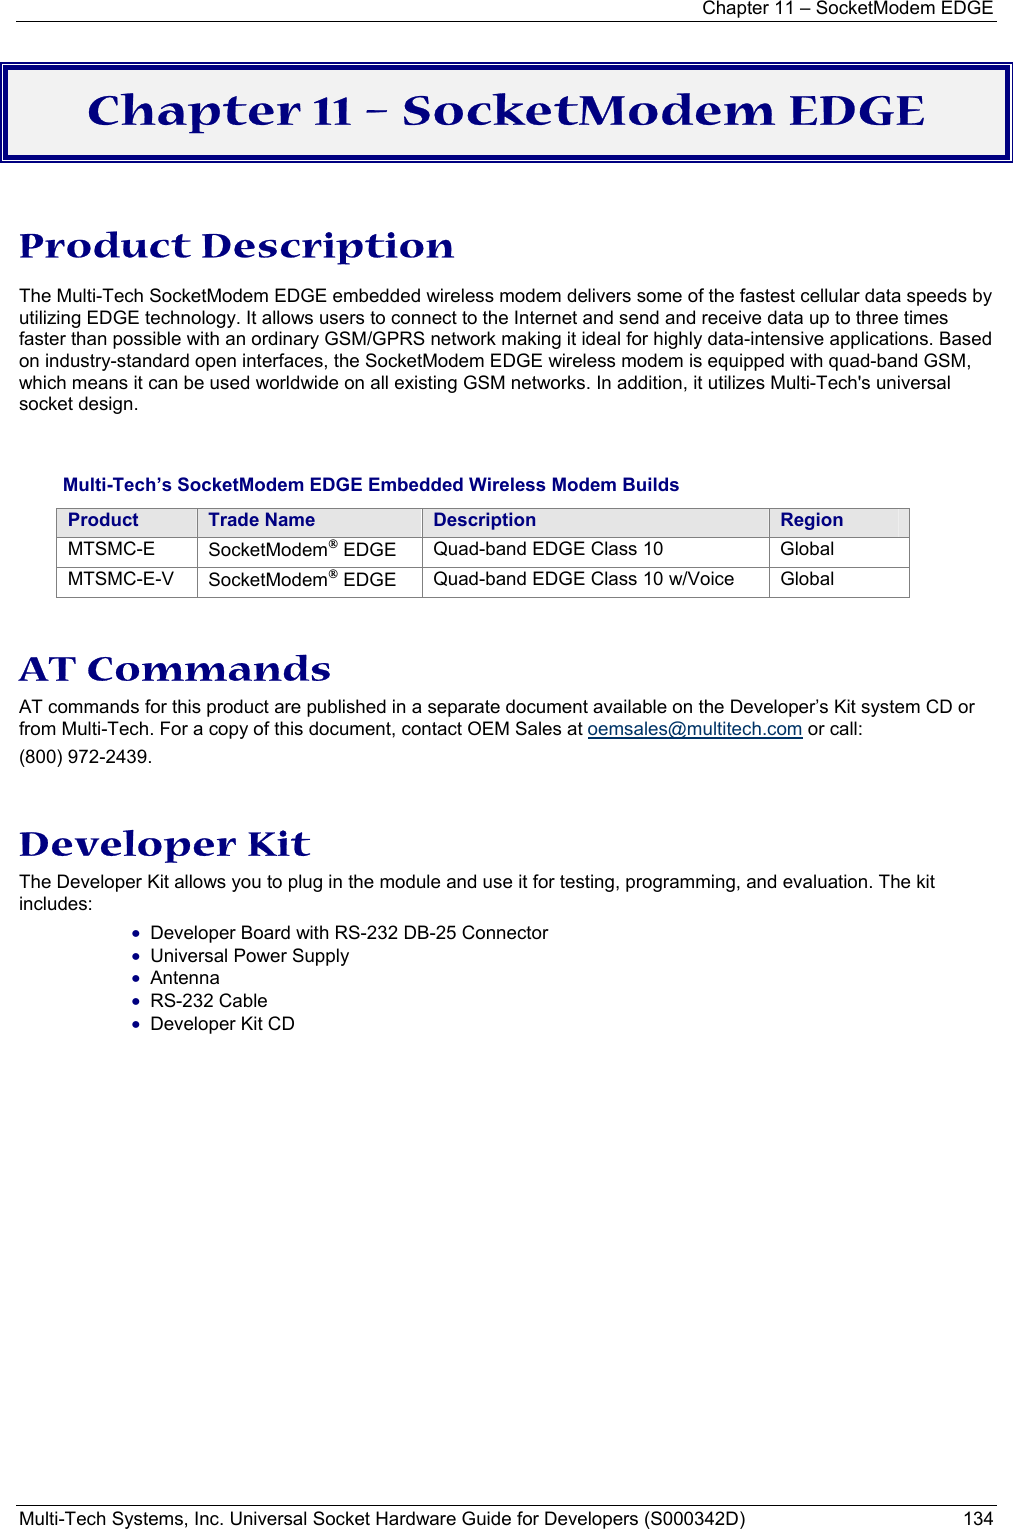 Chapter 11 – SocketModem EDGE Multi-Tech Systems, Inc. Universal Socket Hardware Guide for Developers (S000342D)  134  Chapter 11 – SocketModem EDGE  Product Description The Multi-Tech SocketModem EDGE embedded wireless modem delivers some of the fastest cellular data speeds by utilizing EDGE technology. It allows users to connect to the Internet and send and receive data up to three times faster than possible with an ordinary GSM/GPRS network making it ideal for highly data-intensive applications. Based on industry-standard open interfaces, the SocketModem EDGE wireless modem is equipped with quad-band GSM, which means it can be used worldwide on all existing GSM networks. In addition, it utilizes Multi-Tech&apos;s universal socket design.     Multi-Tech’s SocketModem EDGE Embedded Wireless Modem Builds Product  Trade Name  Description  Region MTSMC-E  SocketModem EDGE  Quad-band EDGE Class 10  Global MTSMC-E-V  SocketModem EDGE  Quad-band EDGE Class 10 w/Voice  Global  AT Commands  AT commands for this product are published in a separate document available on the Developer’s Kit system CD or from Multi-Tech. For a copy of this document, contact OEM Sales at oemsales@multitech.com or call: (800) 972-2439.  Developer Kit The Developer Kit allows you to plug in the module and use it for testing, programming, and evaluation. The kit includes: • Developer Board with RS-232 DB-25 Connector  • Universal Power Supply  • Antenna  • RS-232 Cable • Developer Kit CD  